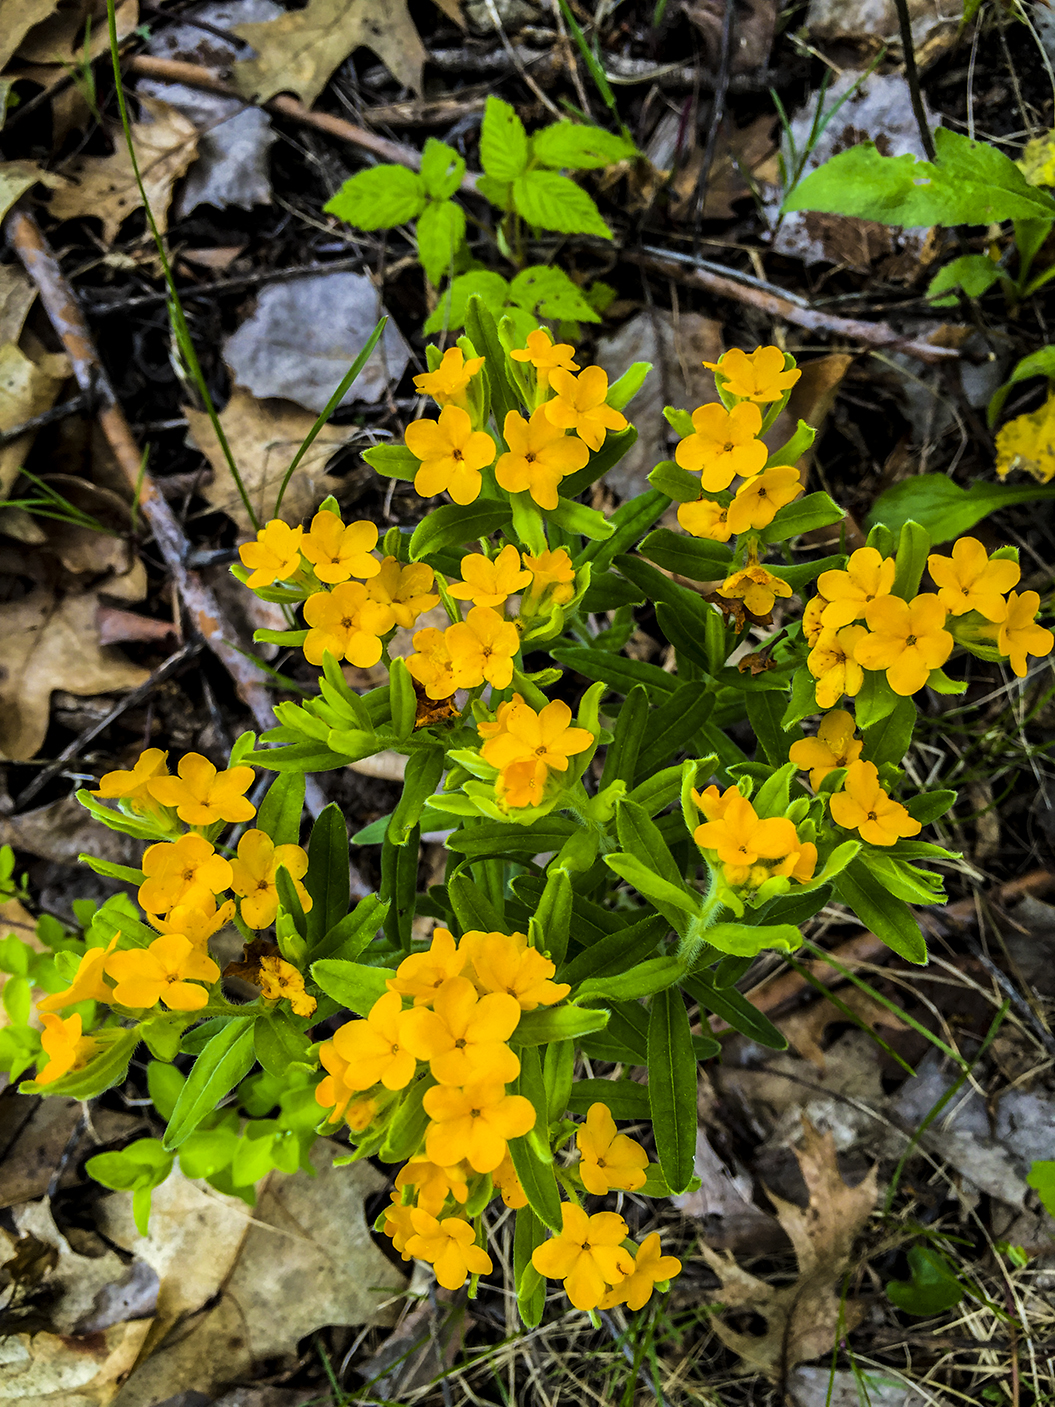 wildflowers along the trail in the Bluff Creek State Natural Area